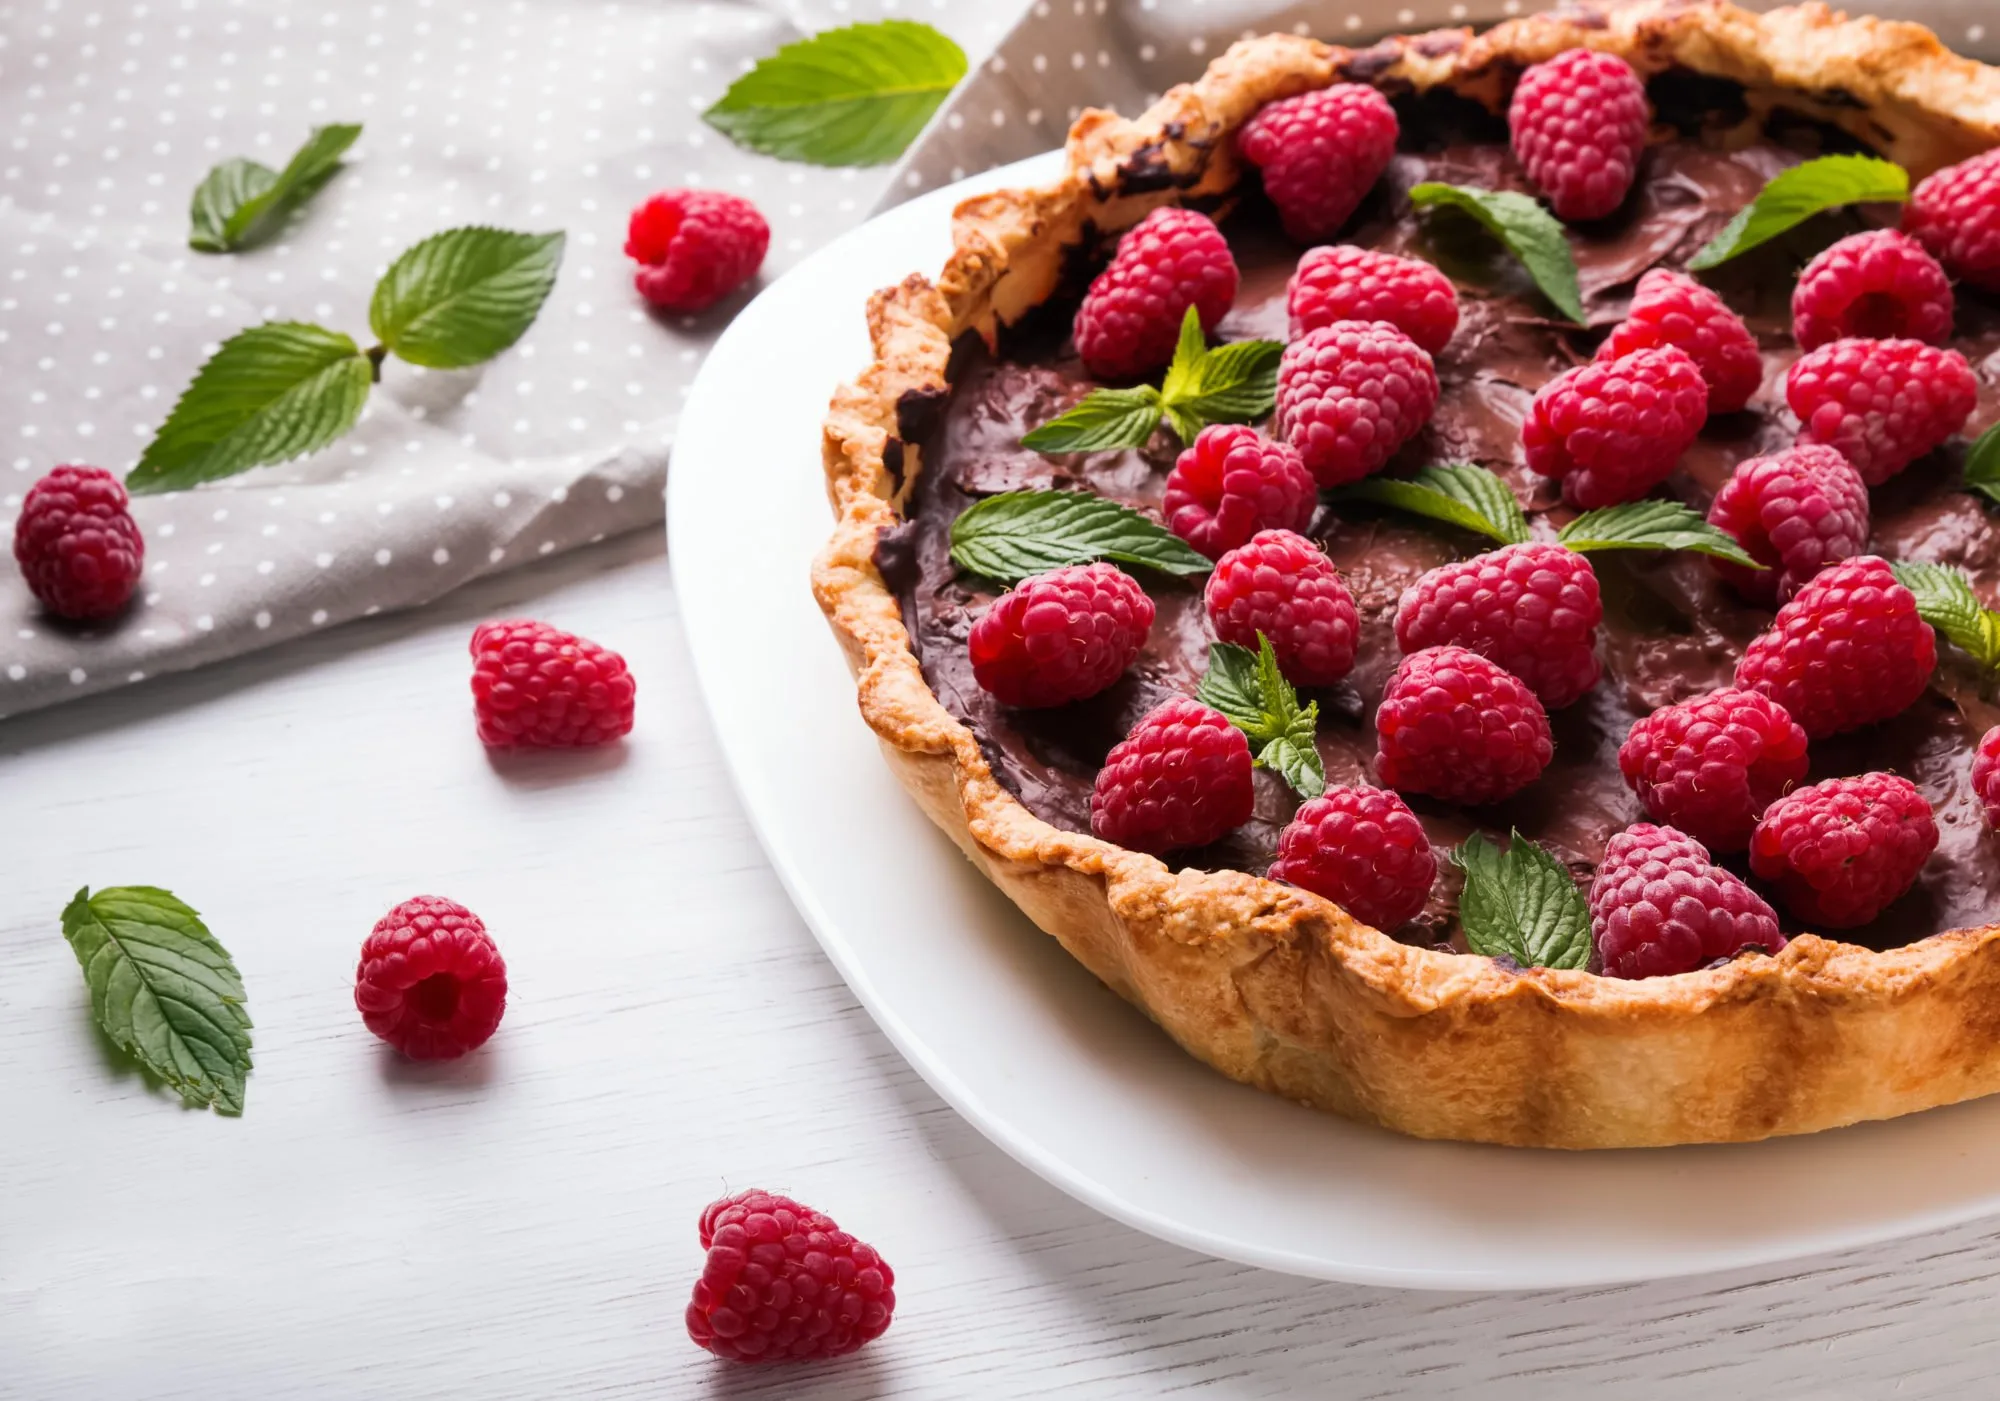 Raspberry & Chocolate Tart: All Natural, Rich And Creamy